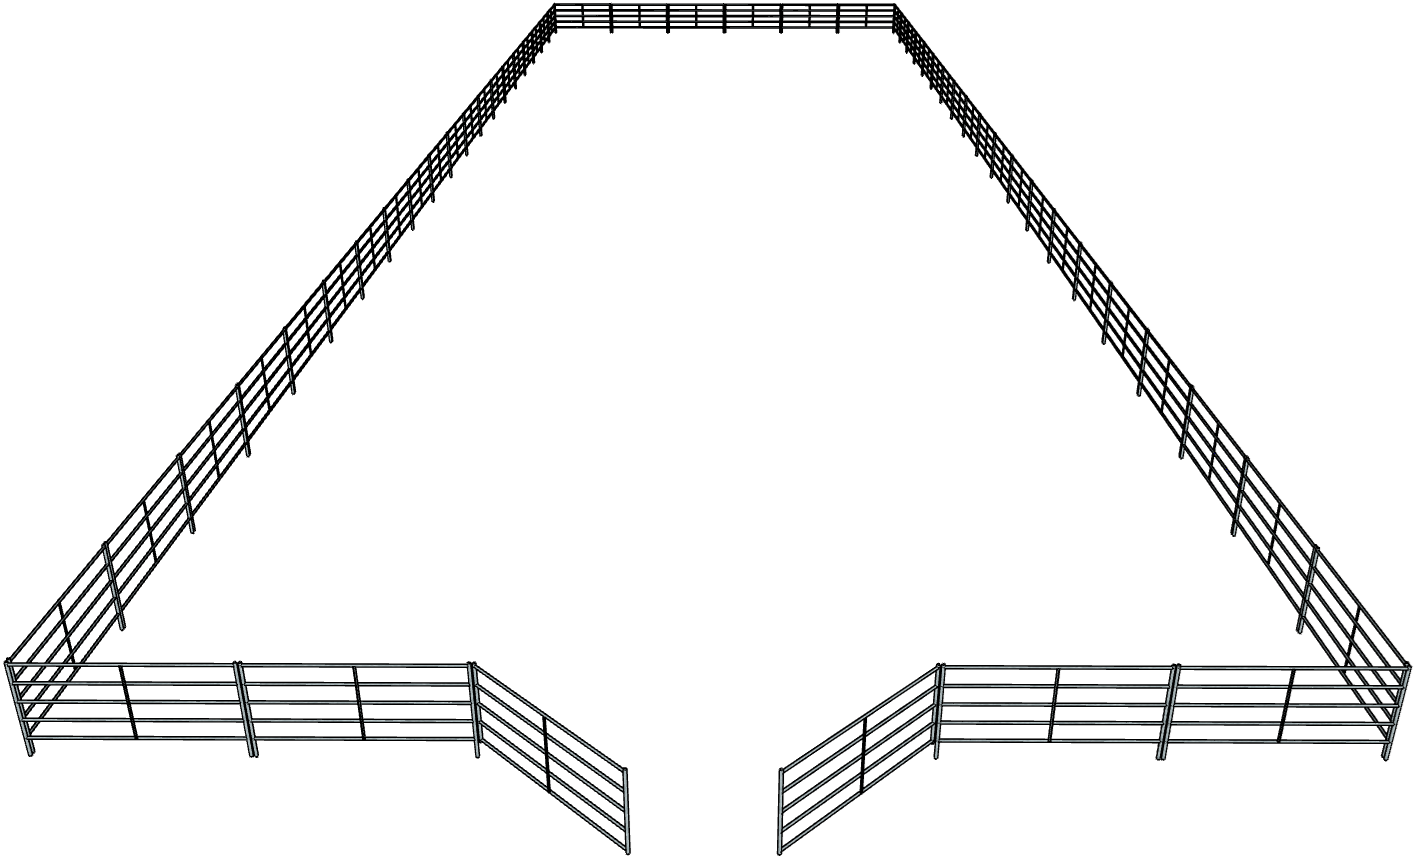 Galvanized 60 Foot by 200 Foot 5-Rail Riding Arena